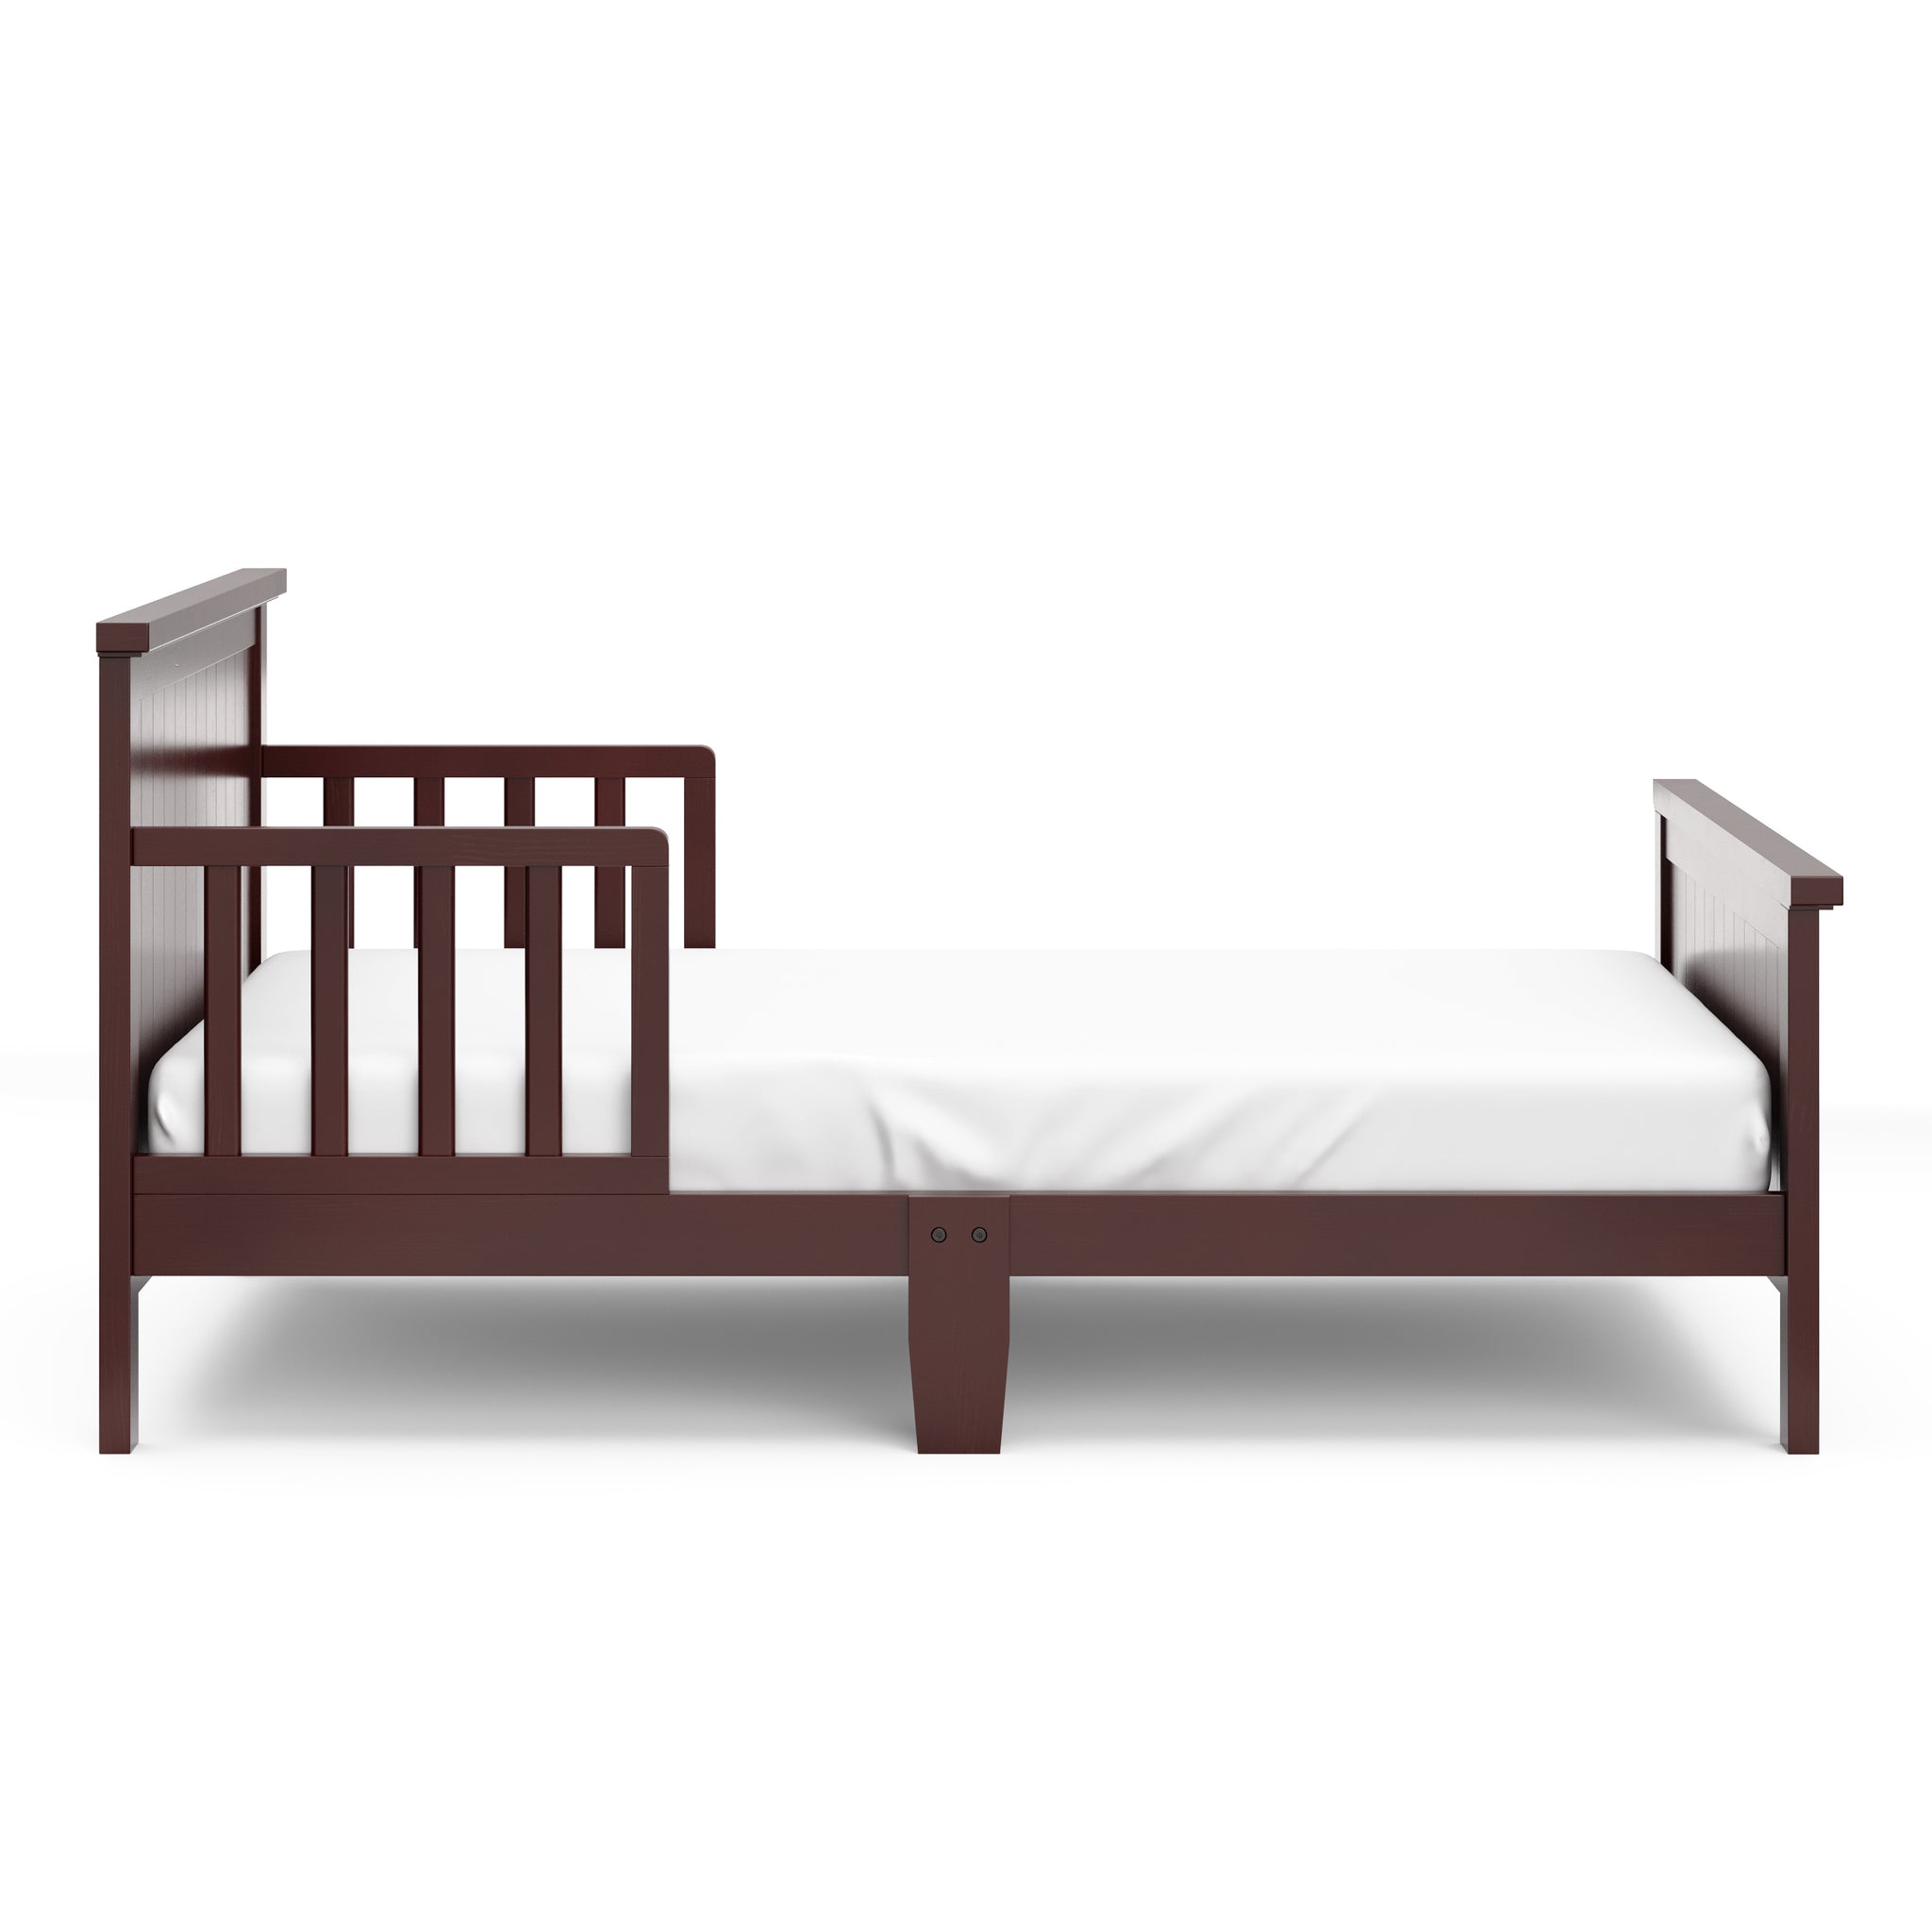 Side view of espresso toddler bed with guardrails